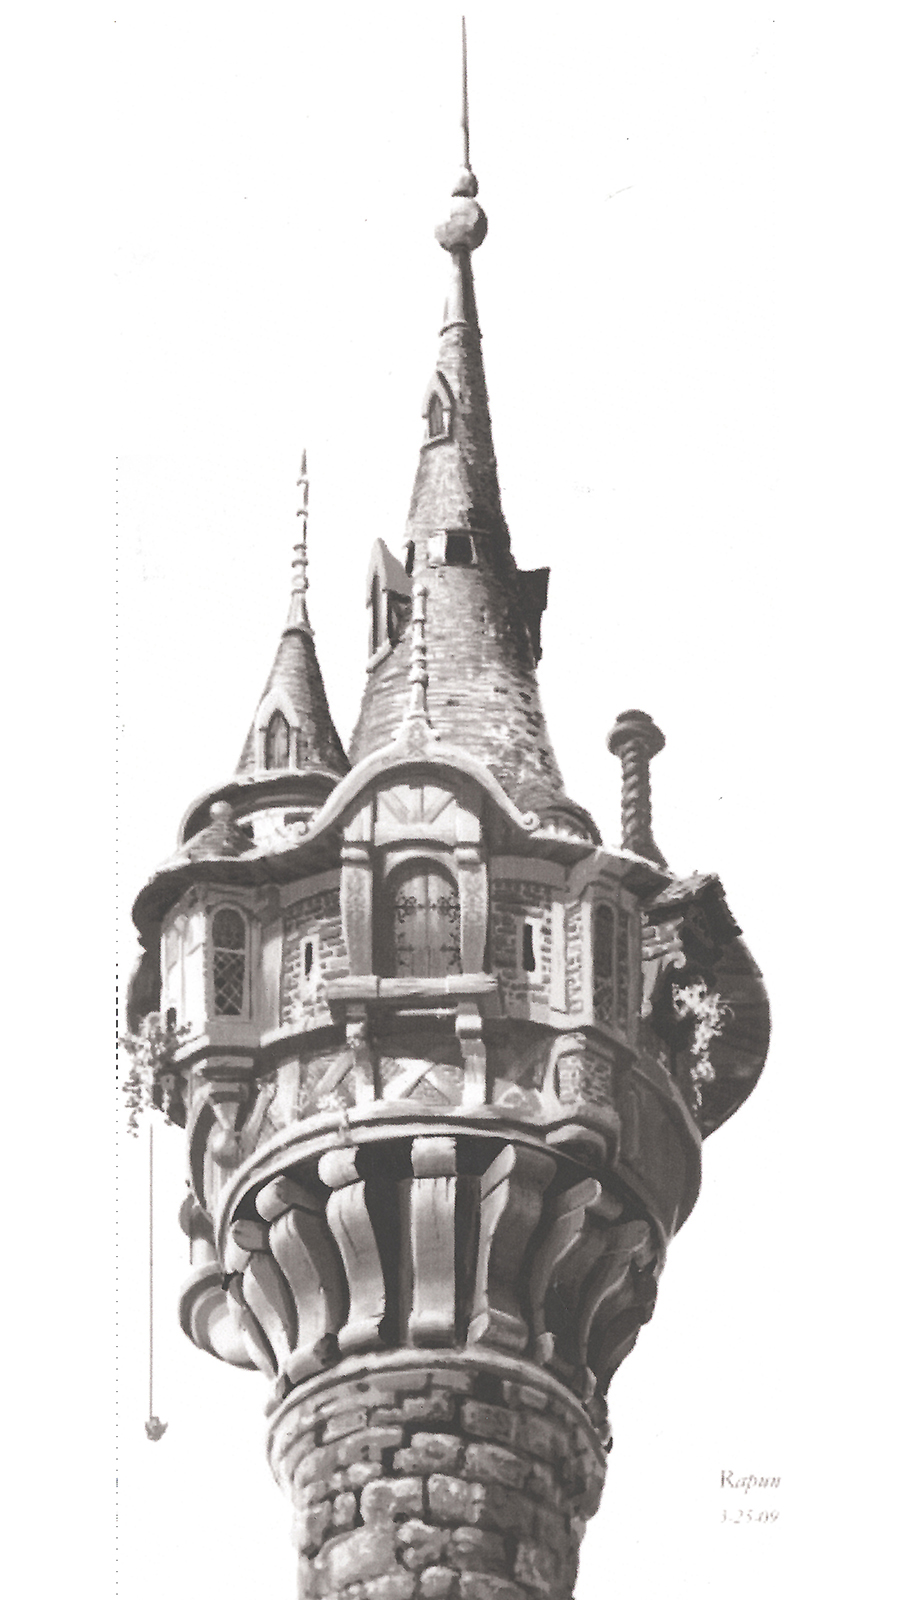 Rogers work on Tangled included this Tower concept